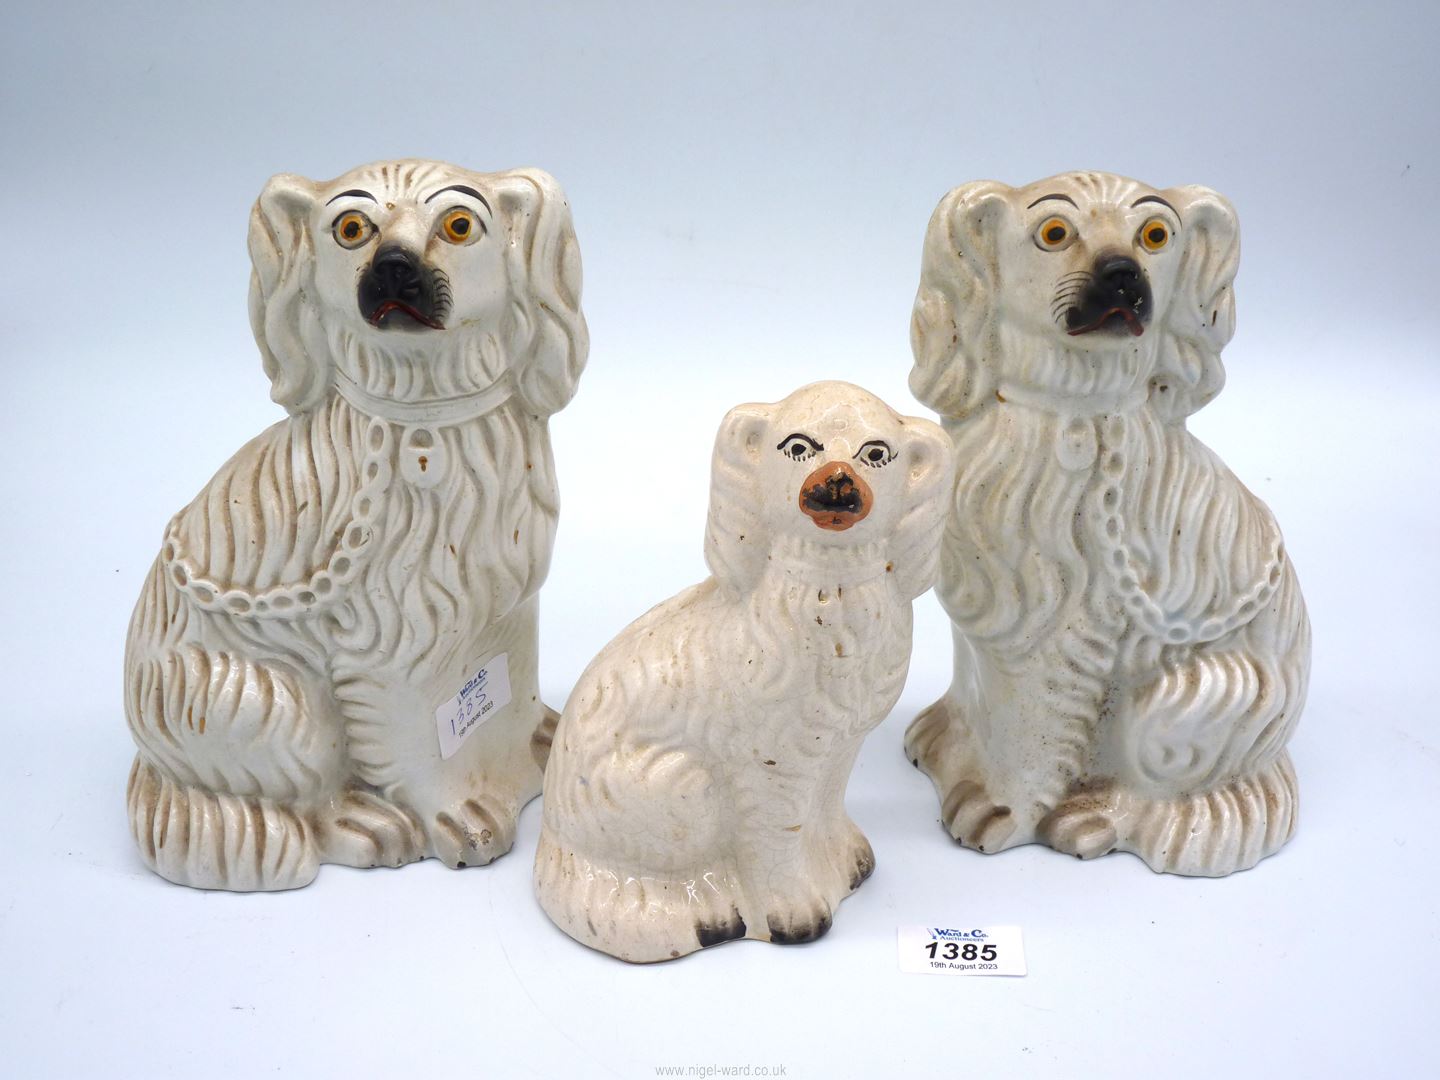 A pair of white Mantle spaniels and a smaller one, 9" and 7" tall.